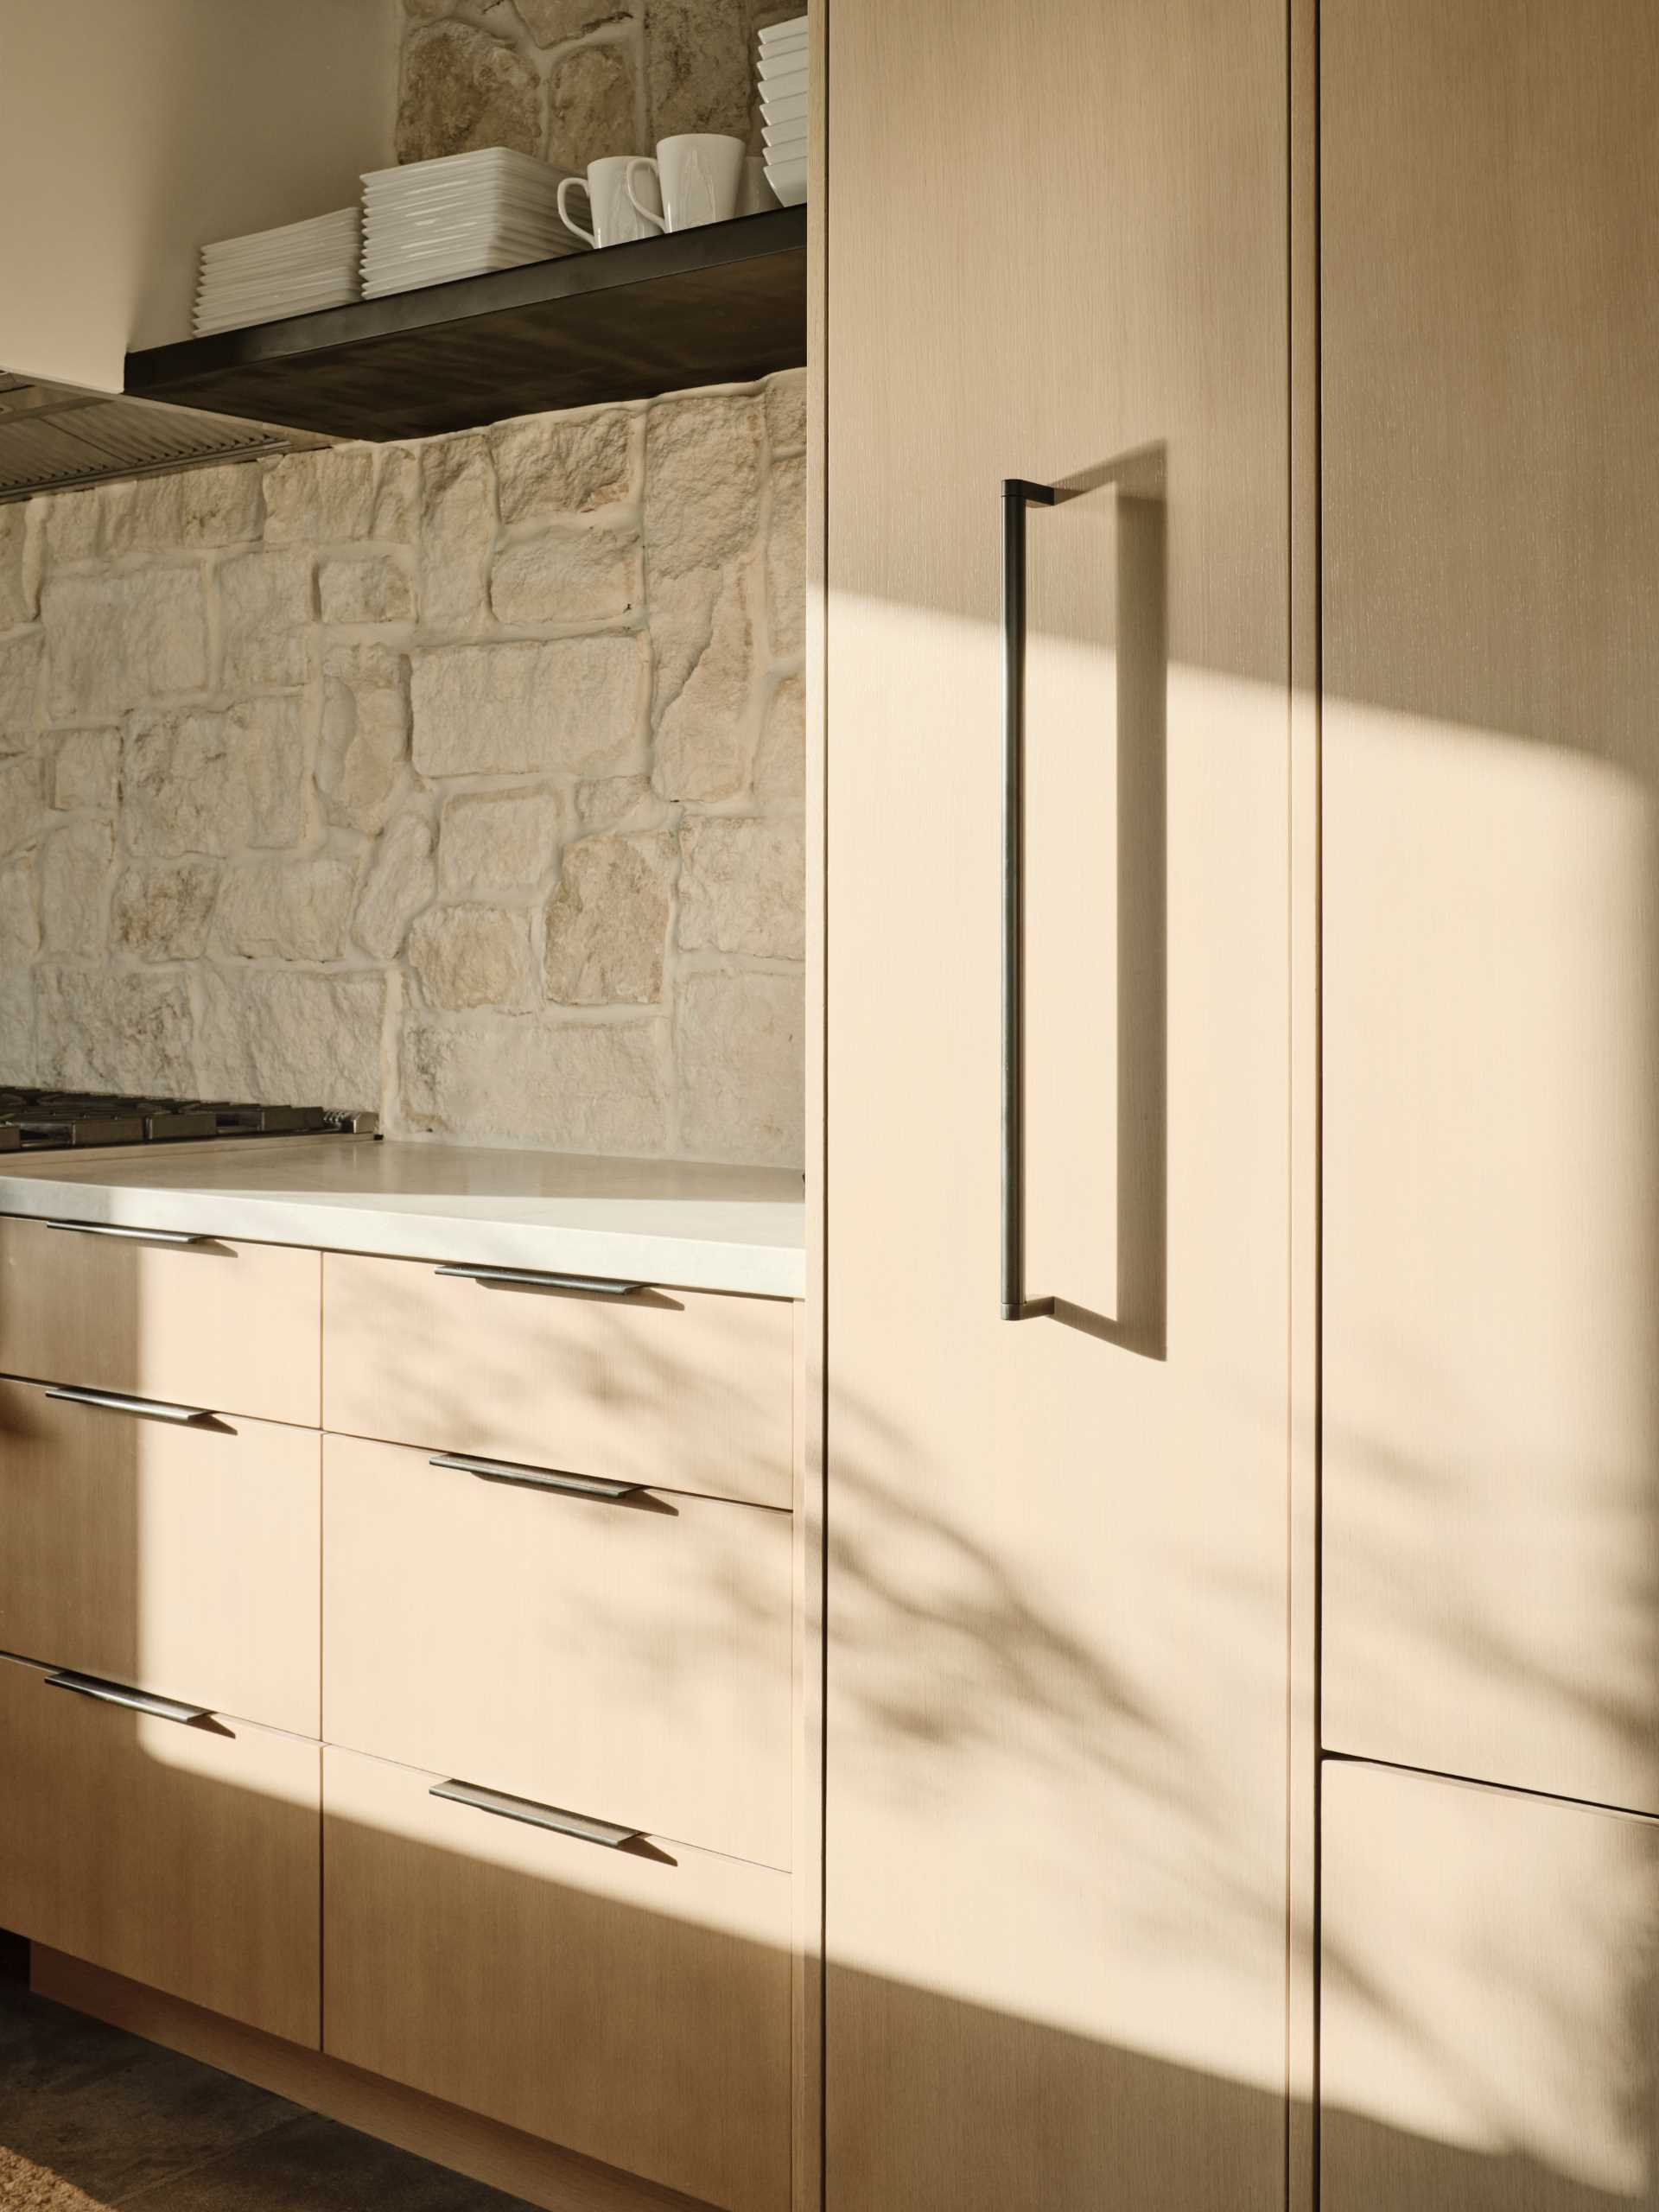 In this kitchen, a stone wall provides a backdrop for the stove and open shelving.